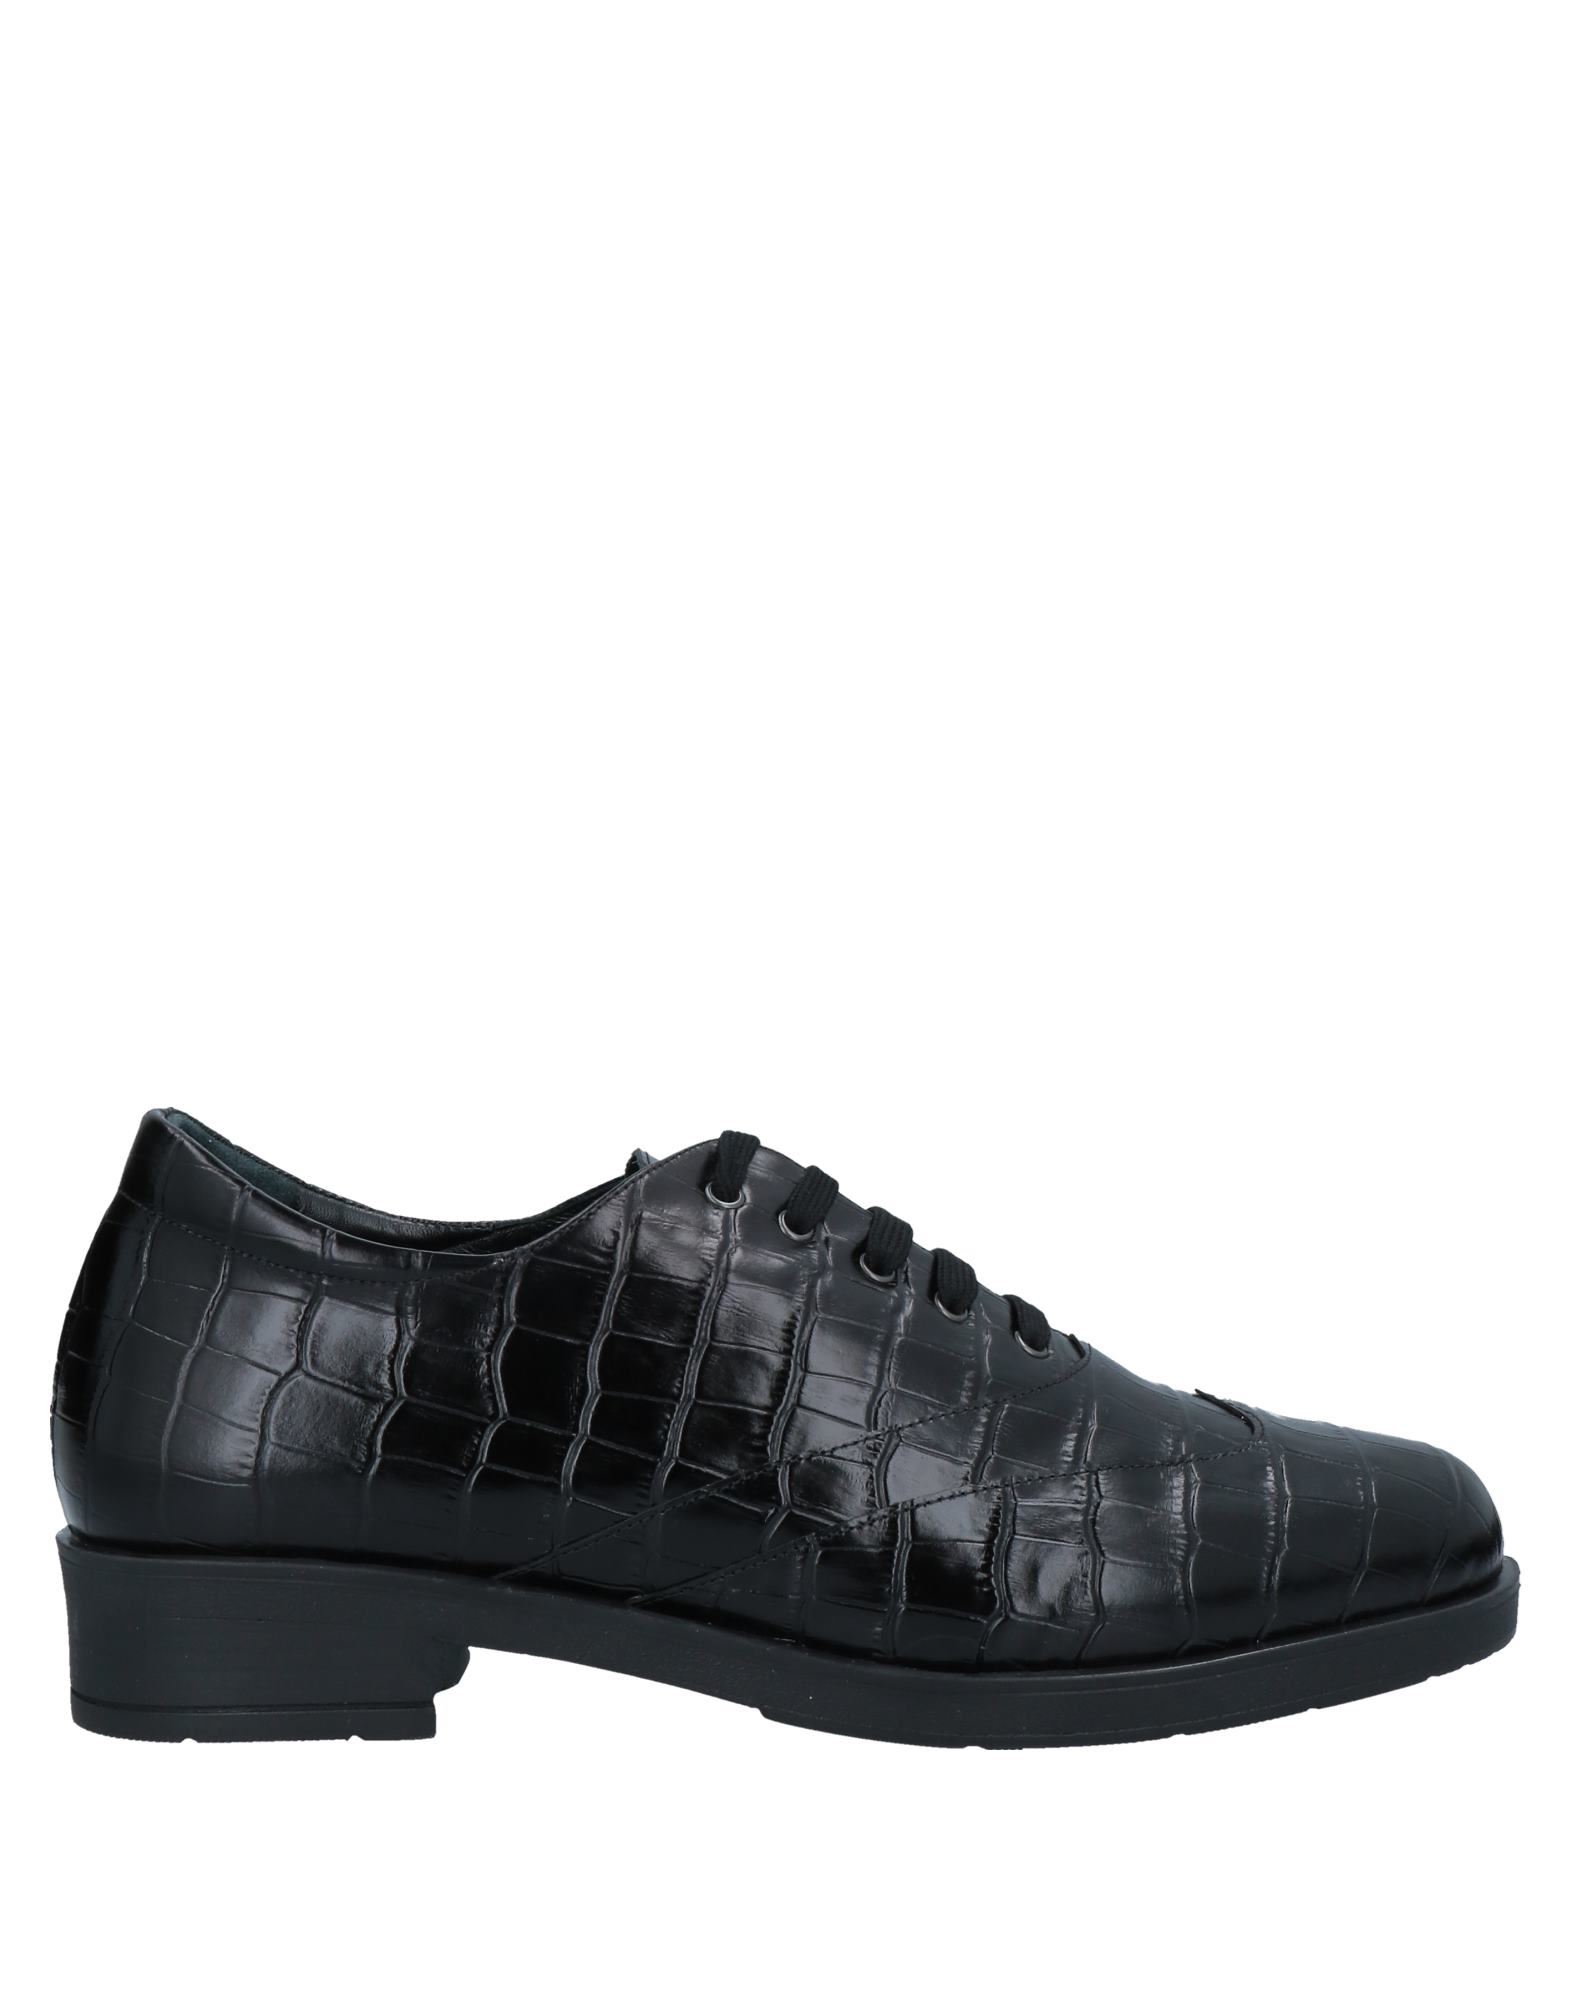 Daniele Ancarani Lace-up Shoes In Black